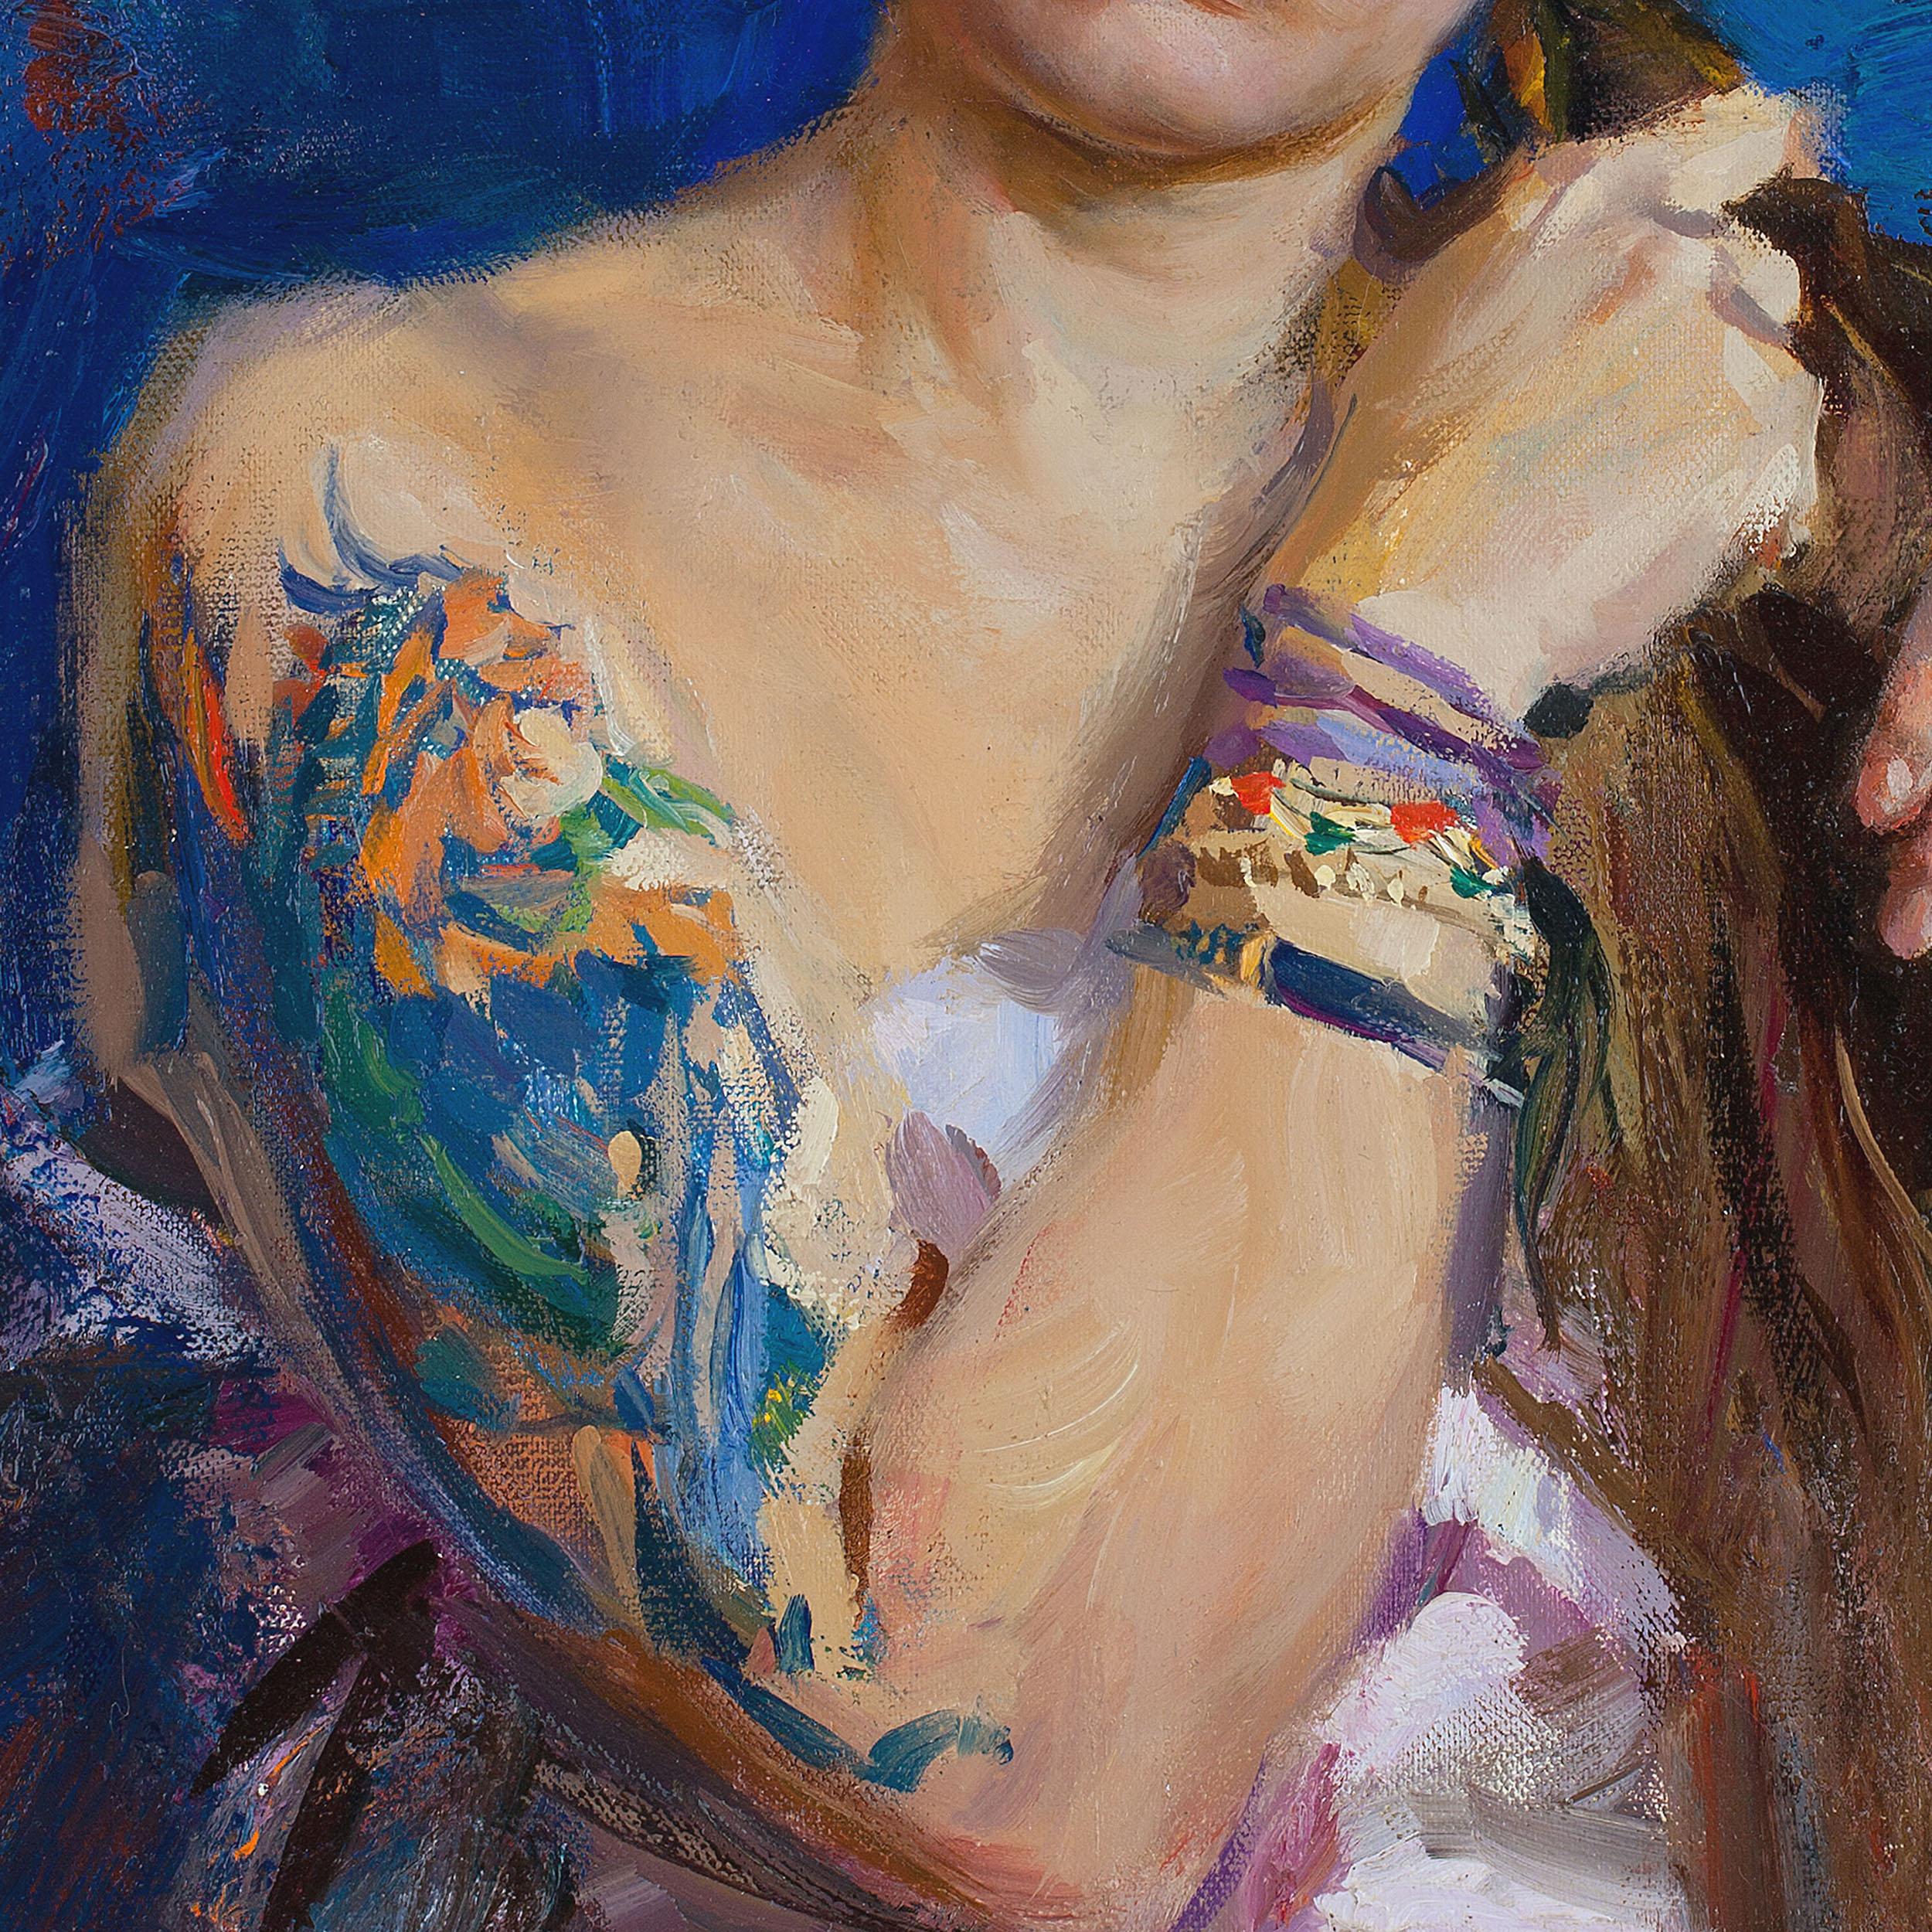 Girl with the Chimera Tattoo - Realist Painting by Evgeniy Monahov